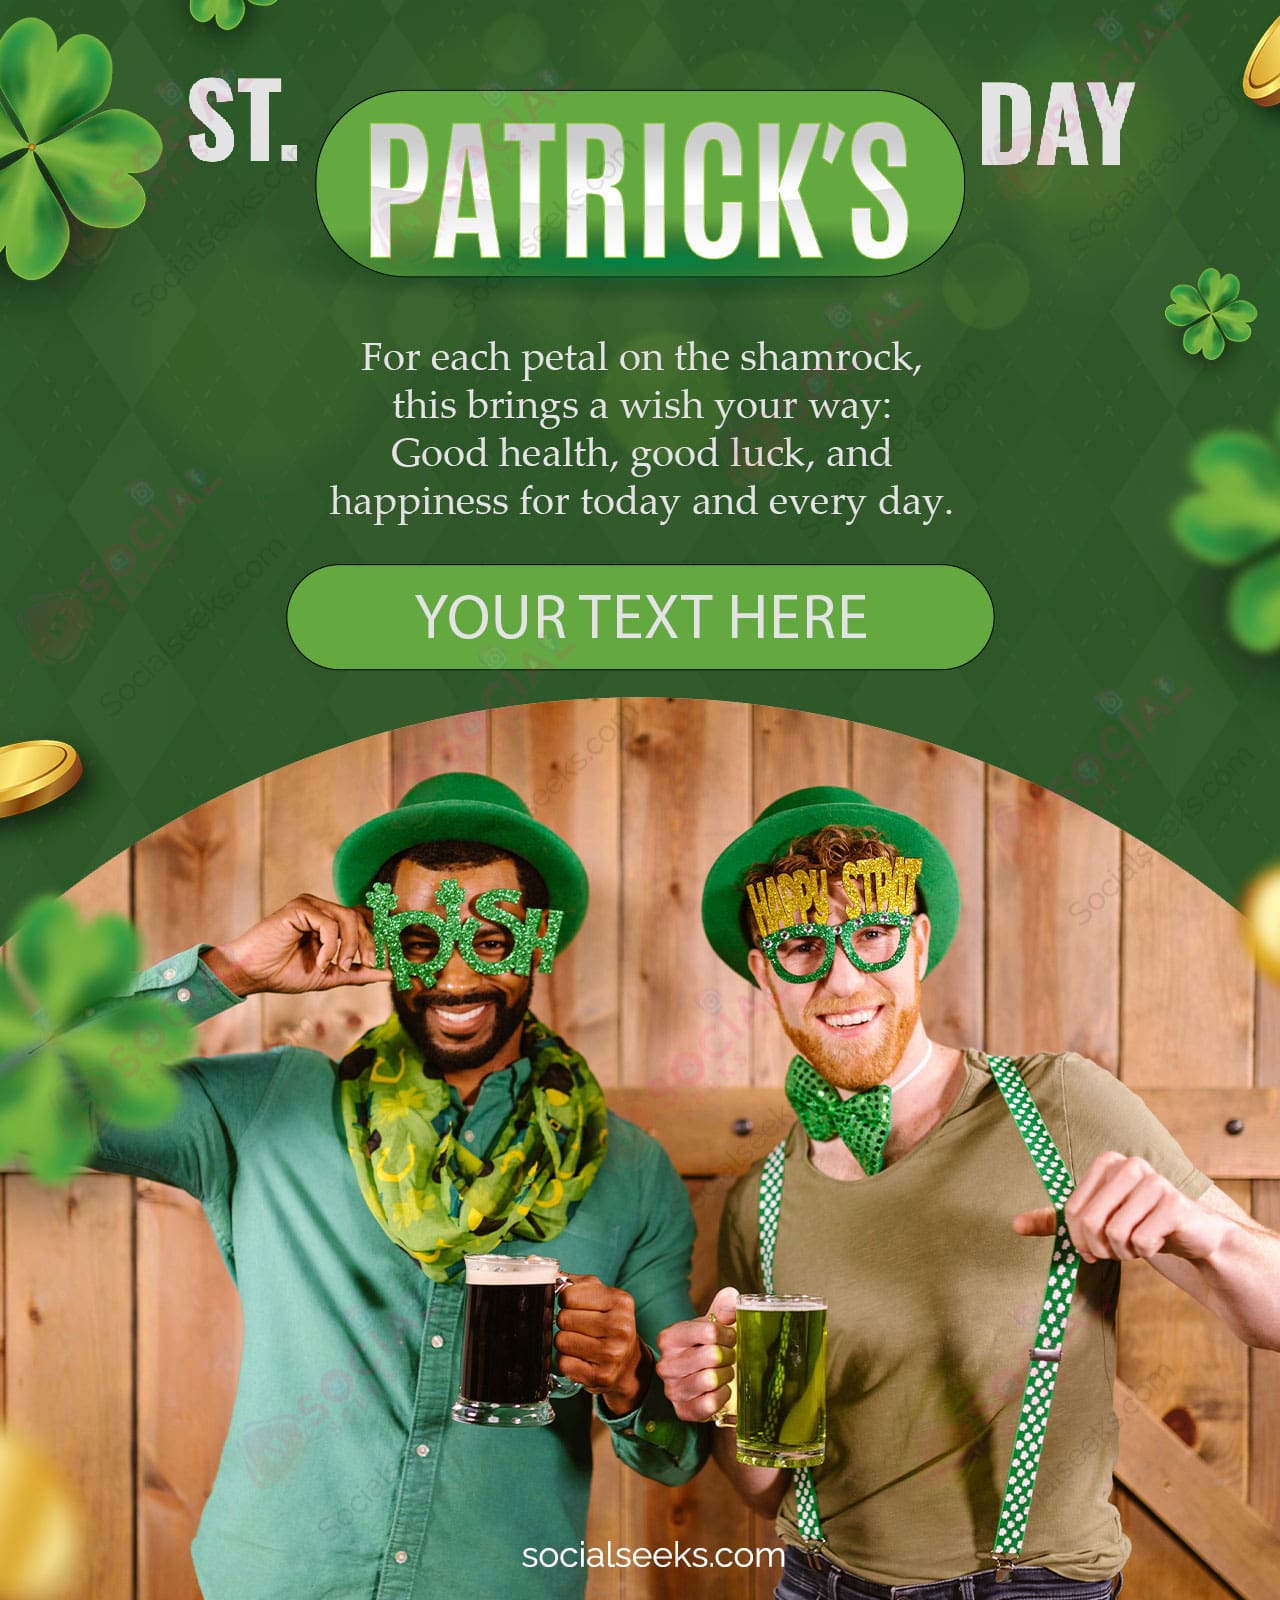 St Patrick's Day Greeting Cards | St Paddy's Day Photo Greeting Cards